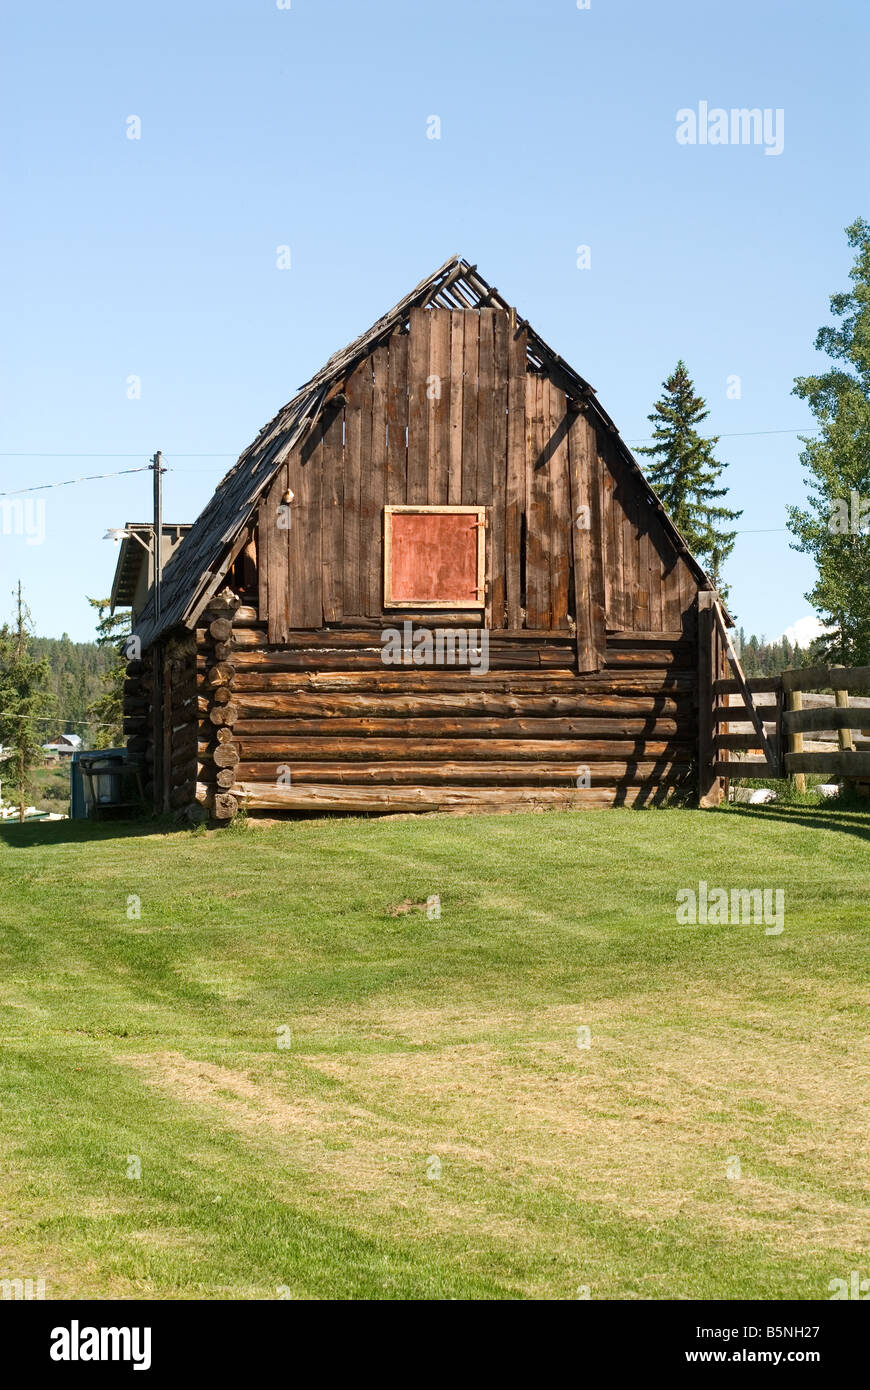 An Old Barn in the South Cariboo Region of British Columbia, Canada. Stock Photo